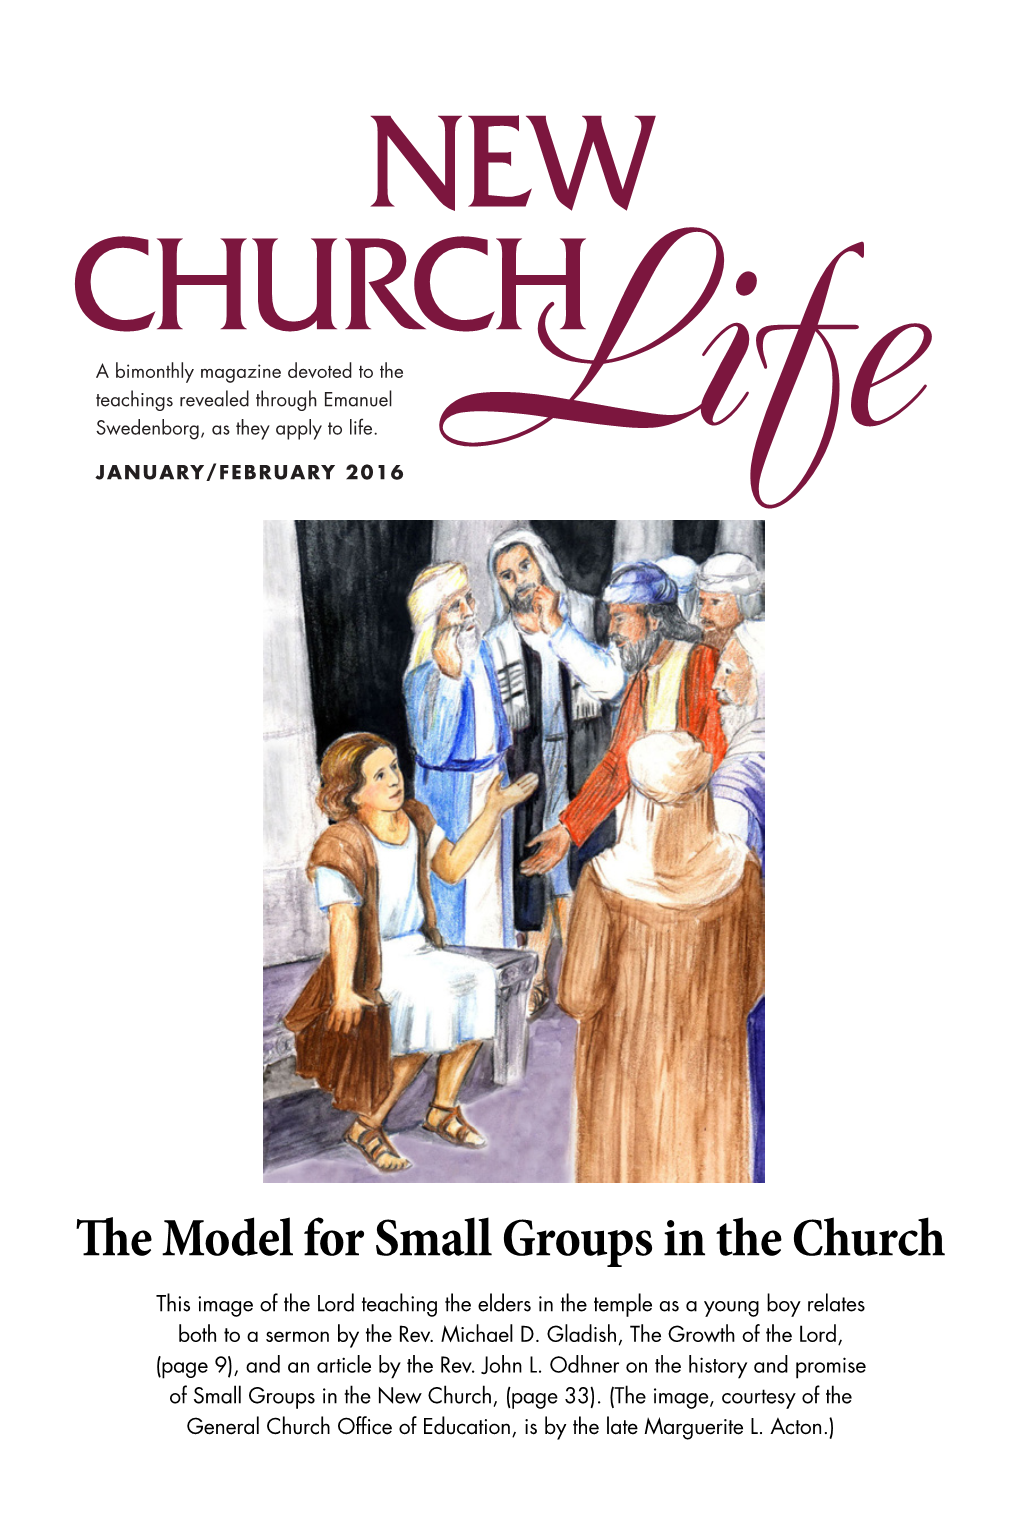 The Model for Small Groups in the Church